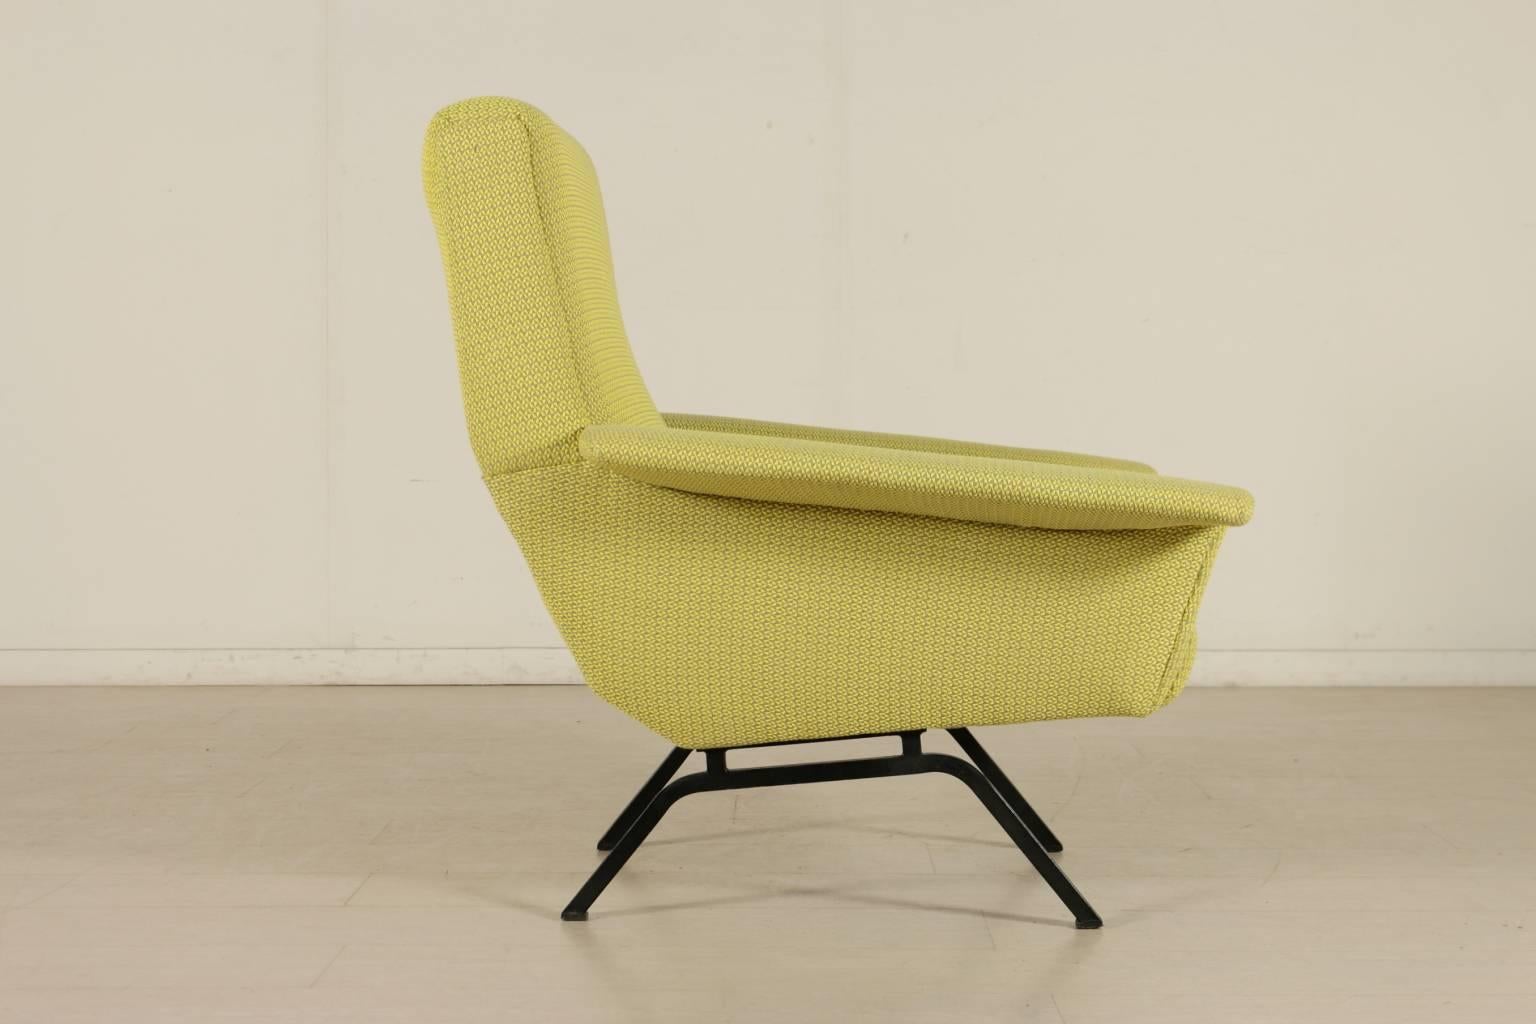 An armchair, foam padding, fabric upholstery. Manufactured in Italy by Busnelli (Meda), 1950s.